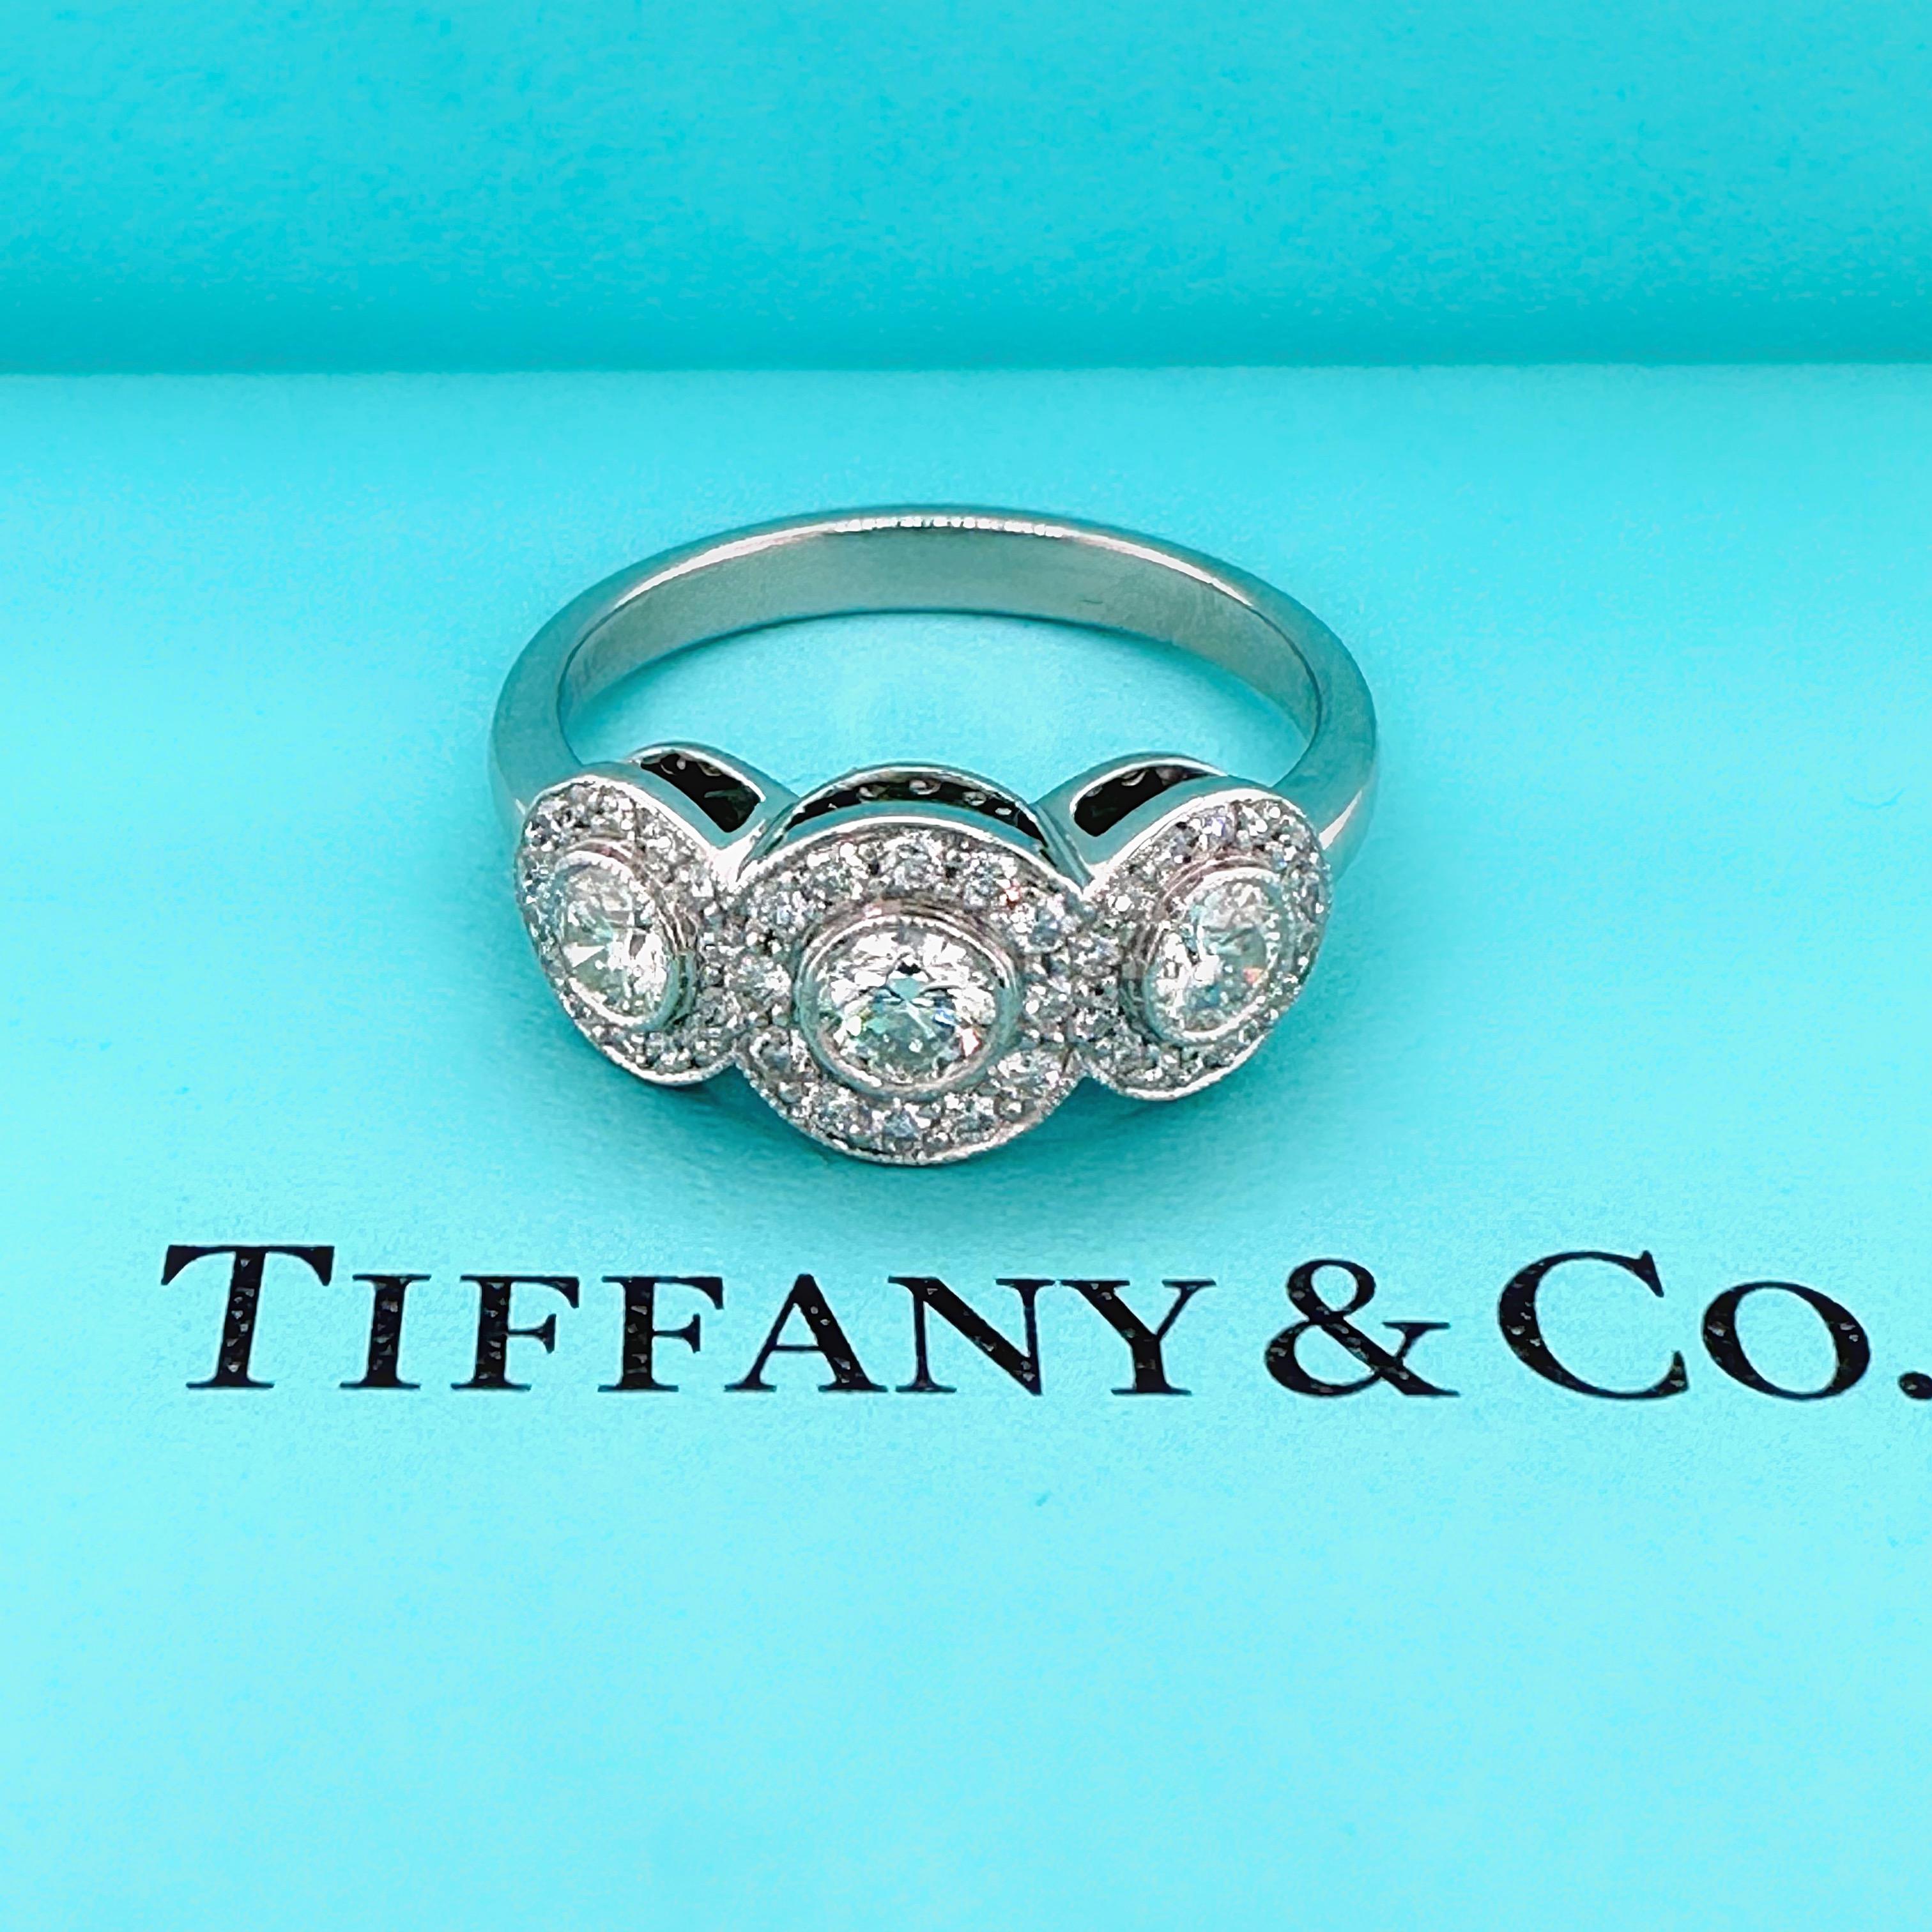 Tiffany & Co. Circlet Ring in Platinum
Style:  Circlet - Ring of diamonds in timeless elegance
Ref. number:  60104036
Metal:  Platinum PT950
Size:  6 - sizable
TCW:  0.53 tcw 
Main Diamond:  3 Round Brilliant Diamonds
Accent Diamonds:  40 Round